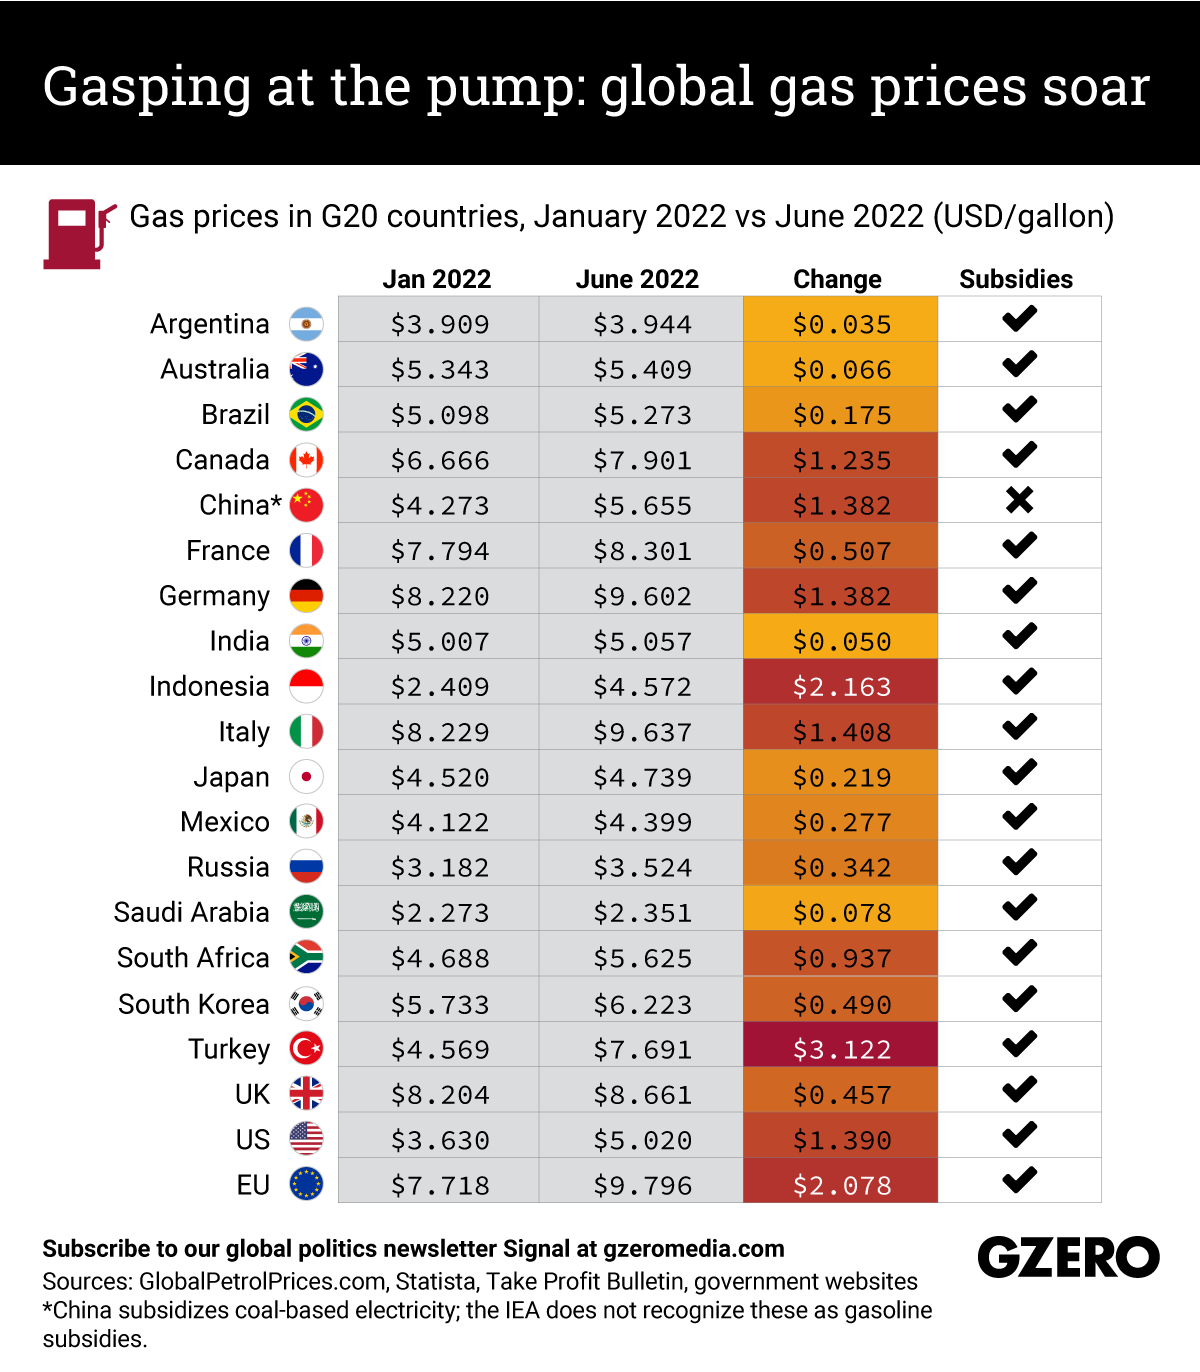 The Graphic Truth: Gasping at the pump – global gas prices soar ​